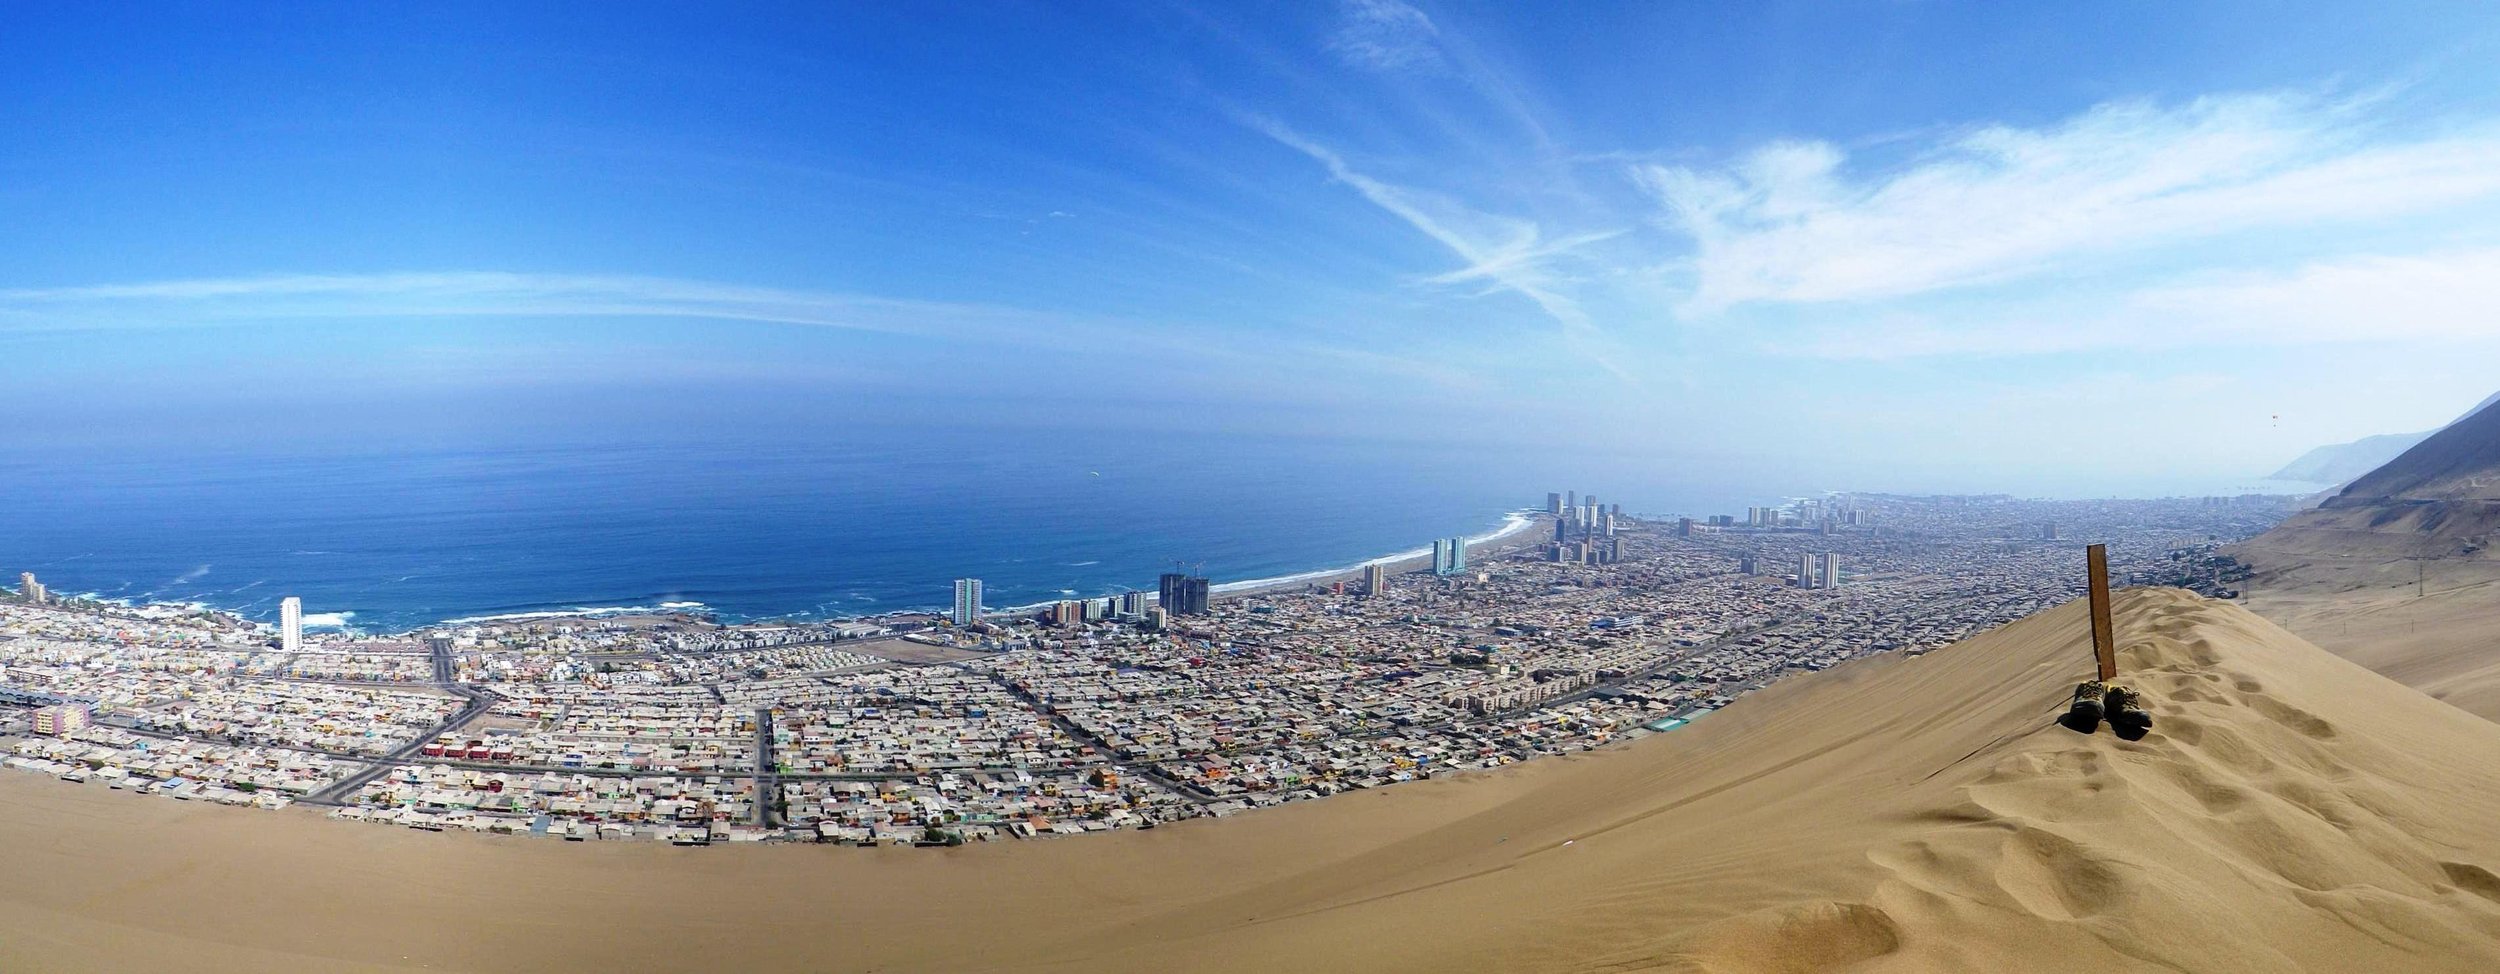 The coastal city of Iquique stretches along the seaside, backed by the Cerro Dragon dune at the edge of the city's development.